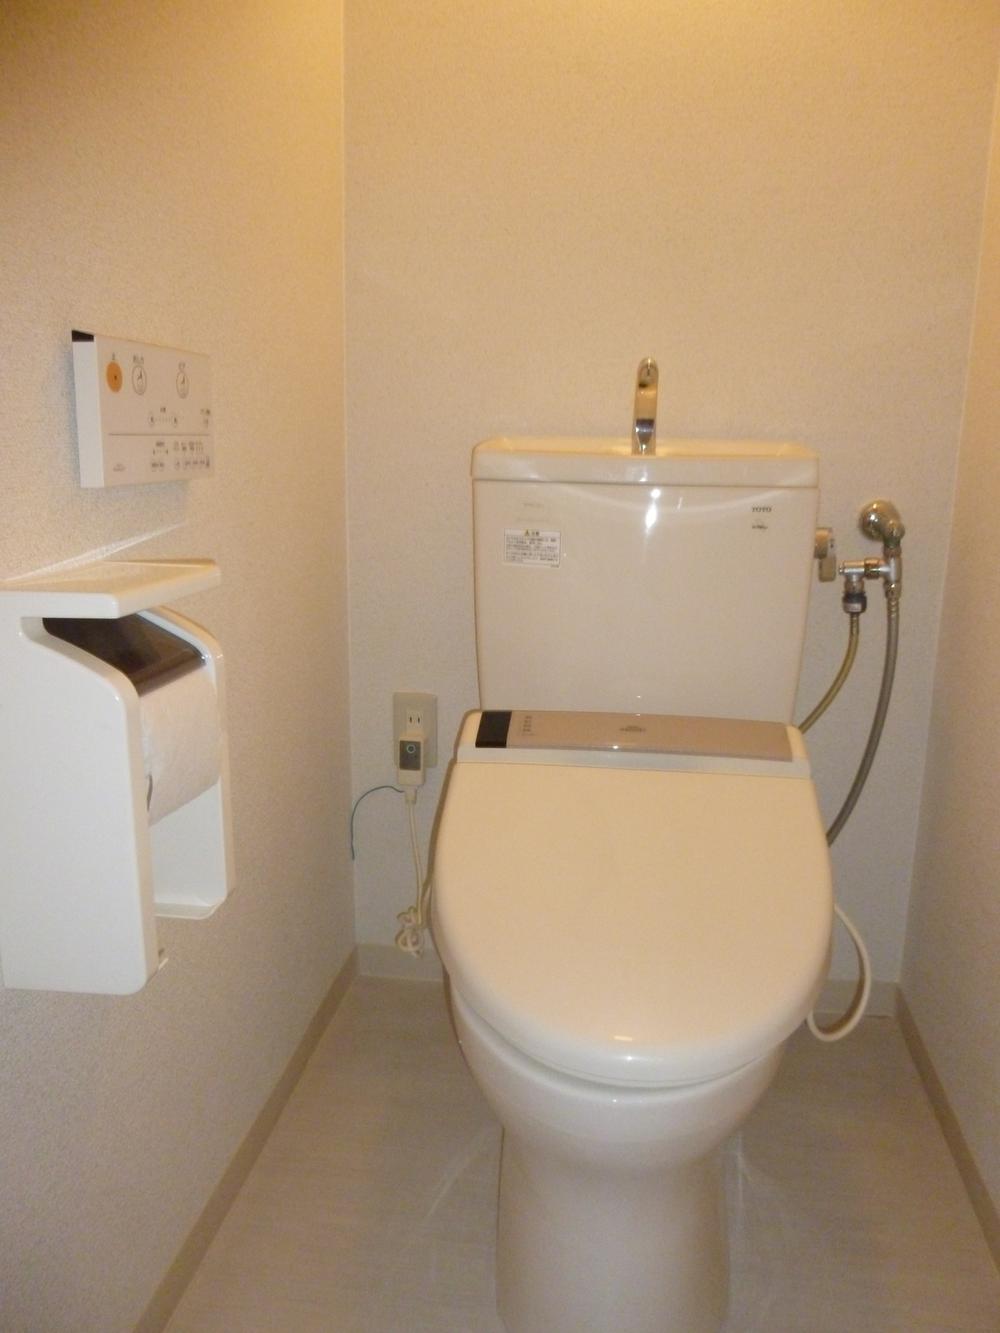 Toilet. Freely open in the automatic sensor